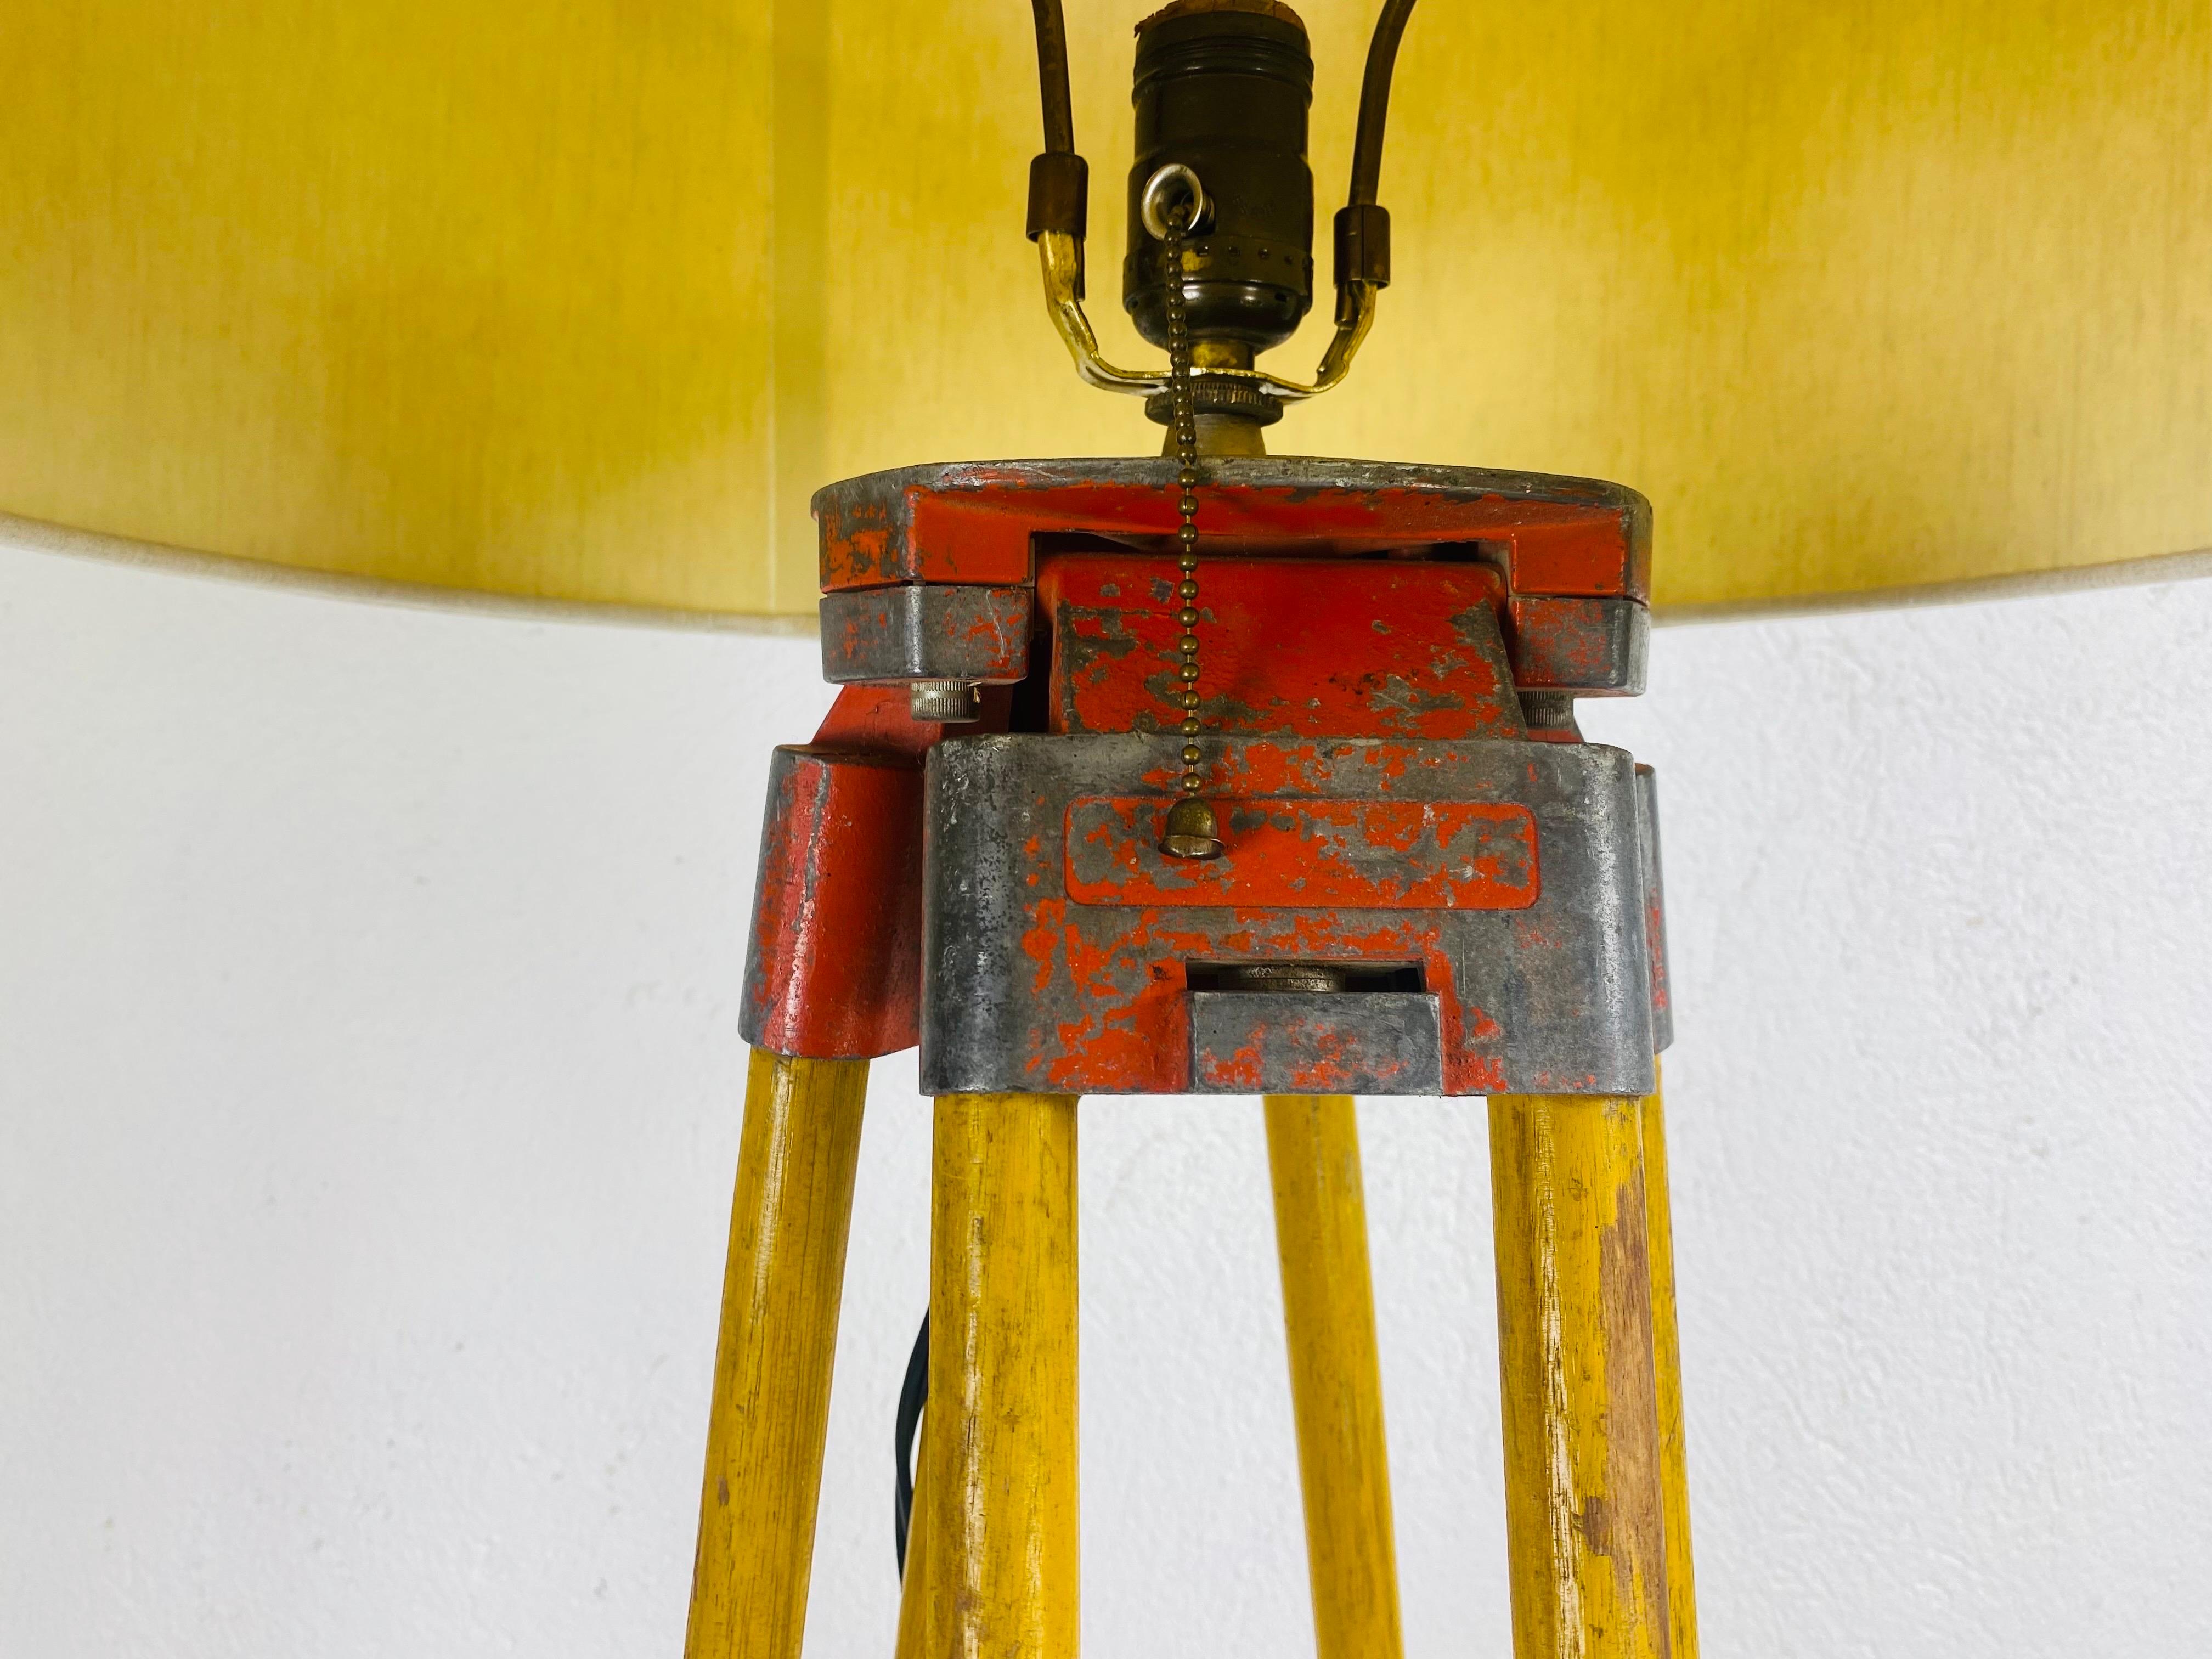 Early 20th century rustic surveyors tripod floor lamp In Distressed Condition For Sale In Allentown, PA